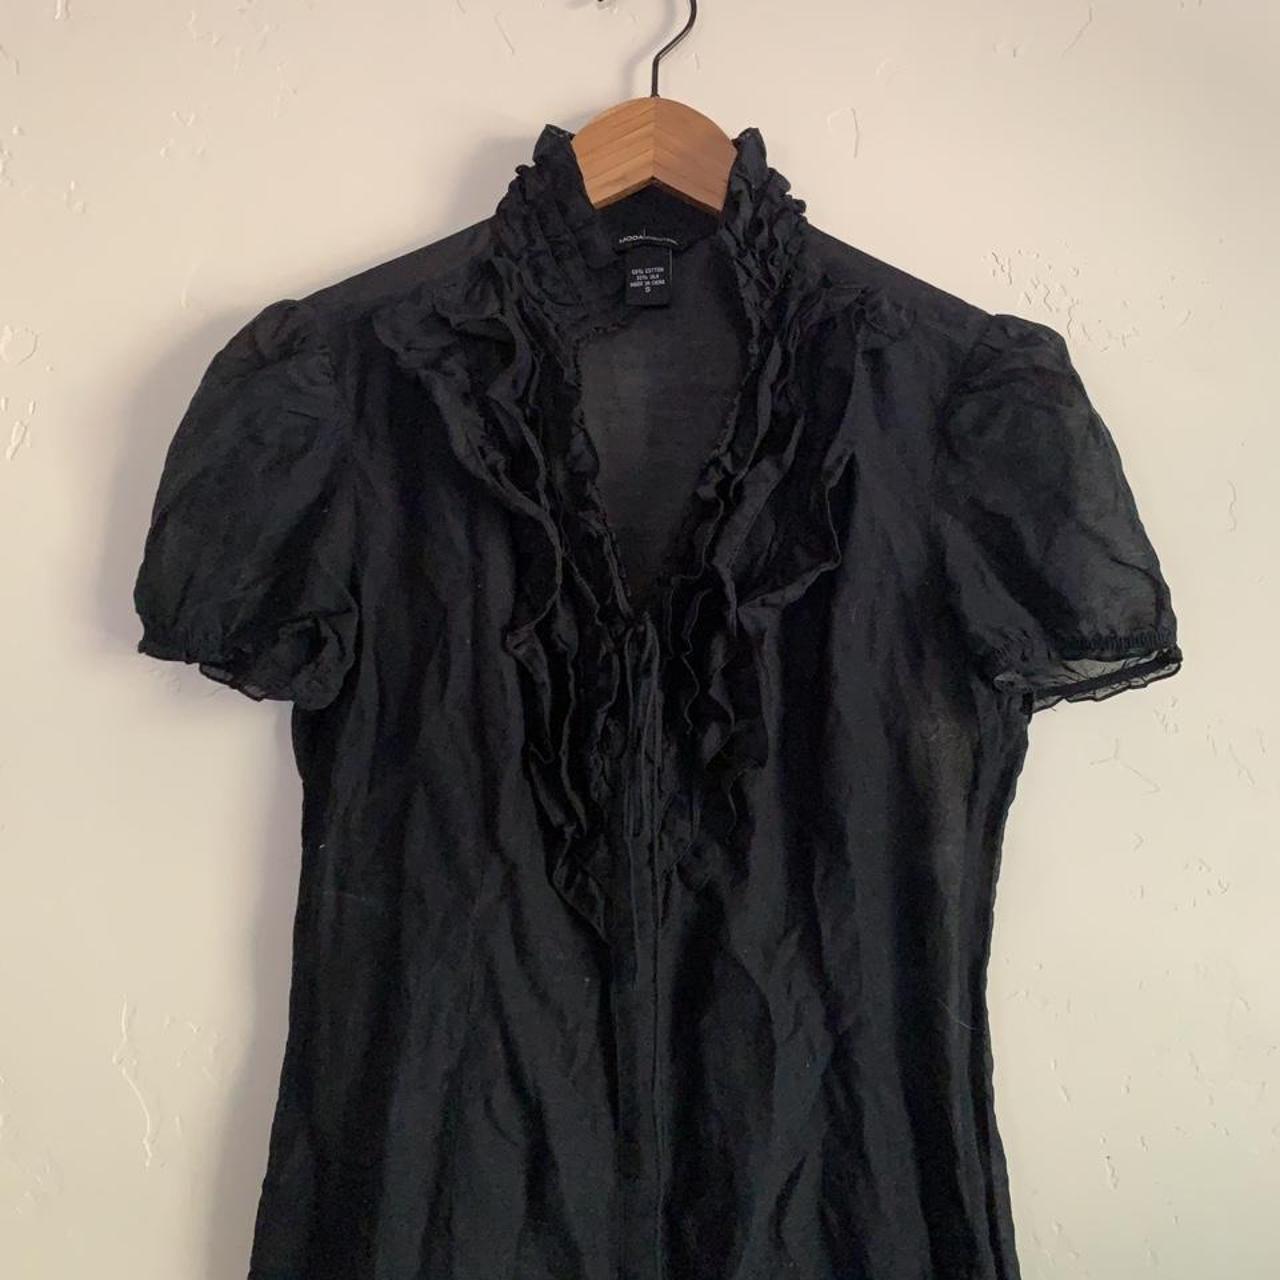 ⭐️|Really cute black 2000s too with ruffles|⭐️(PayPal... - Depop